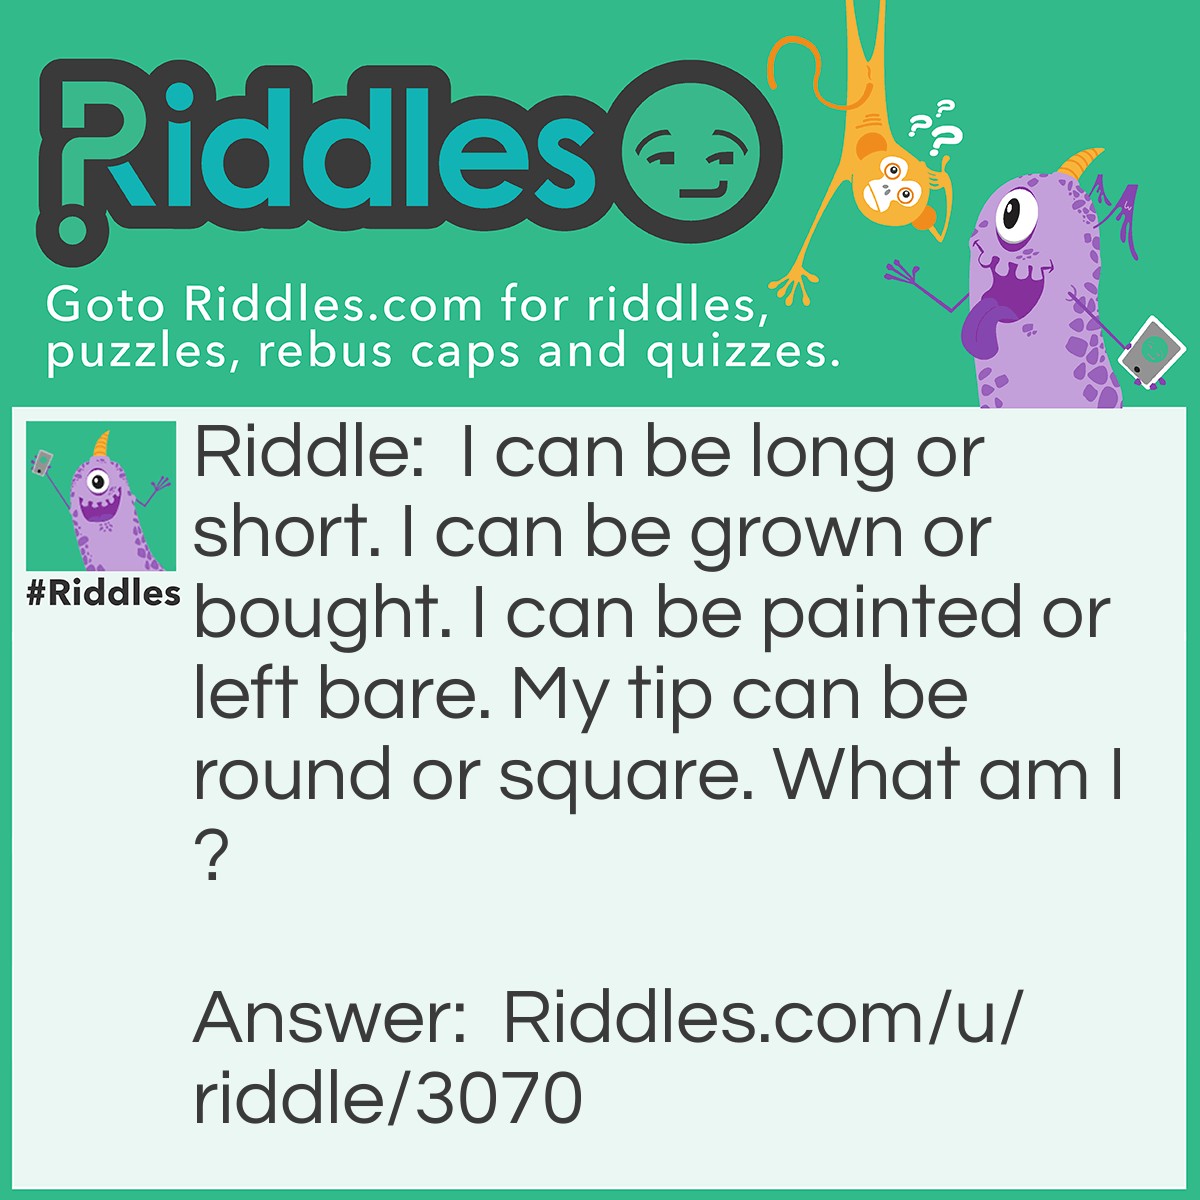 Riddle: I can be long or short. I can be grown or bought. I can be painted or left bare. My tip can be round or square. What am I? Answer: Fingernails.